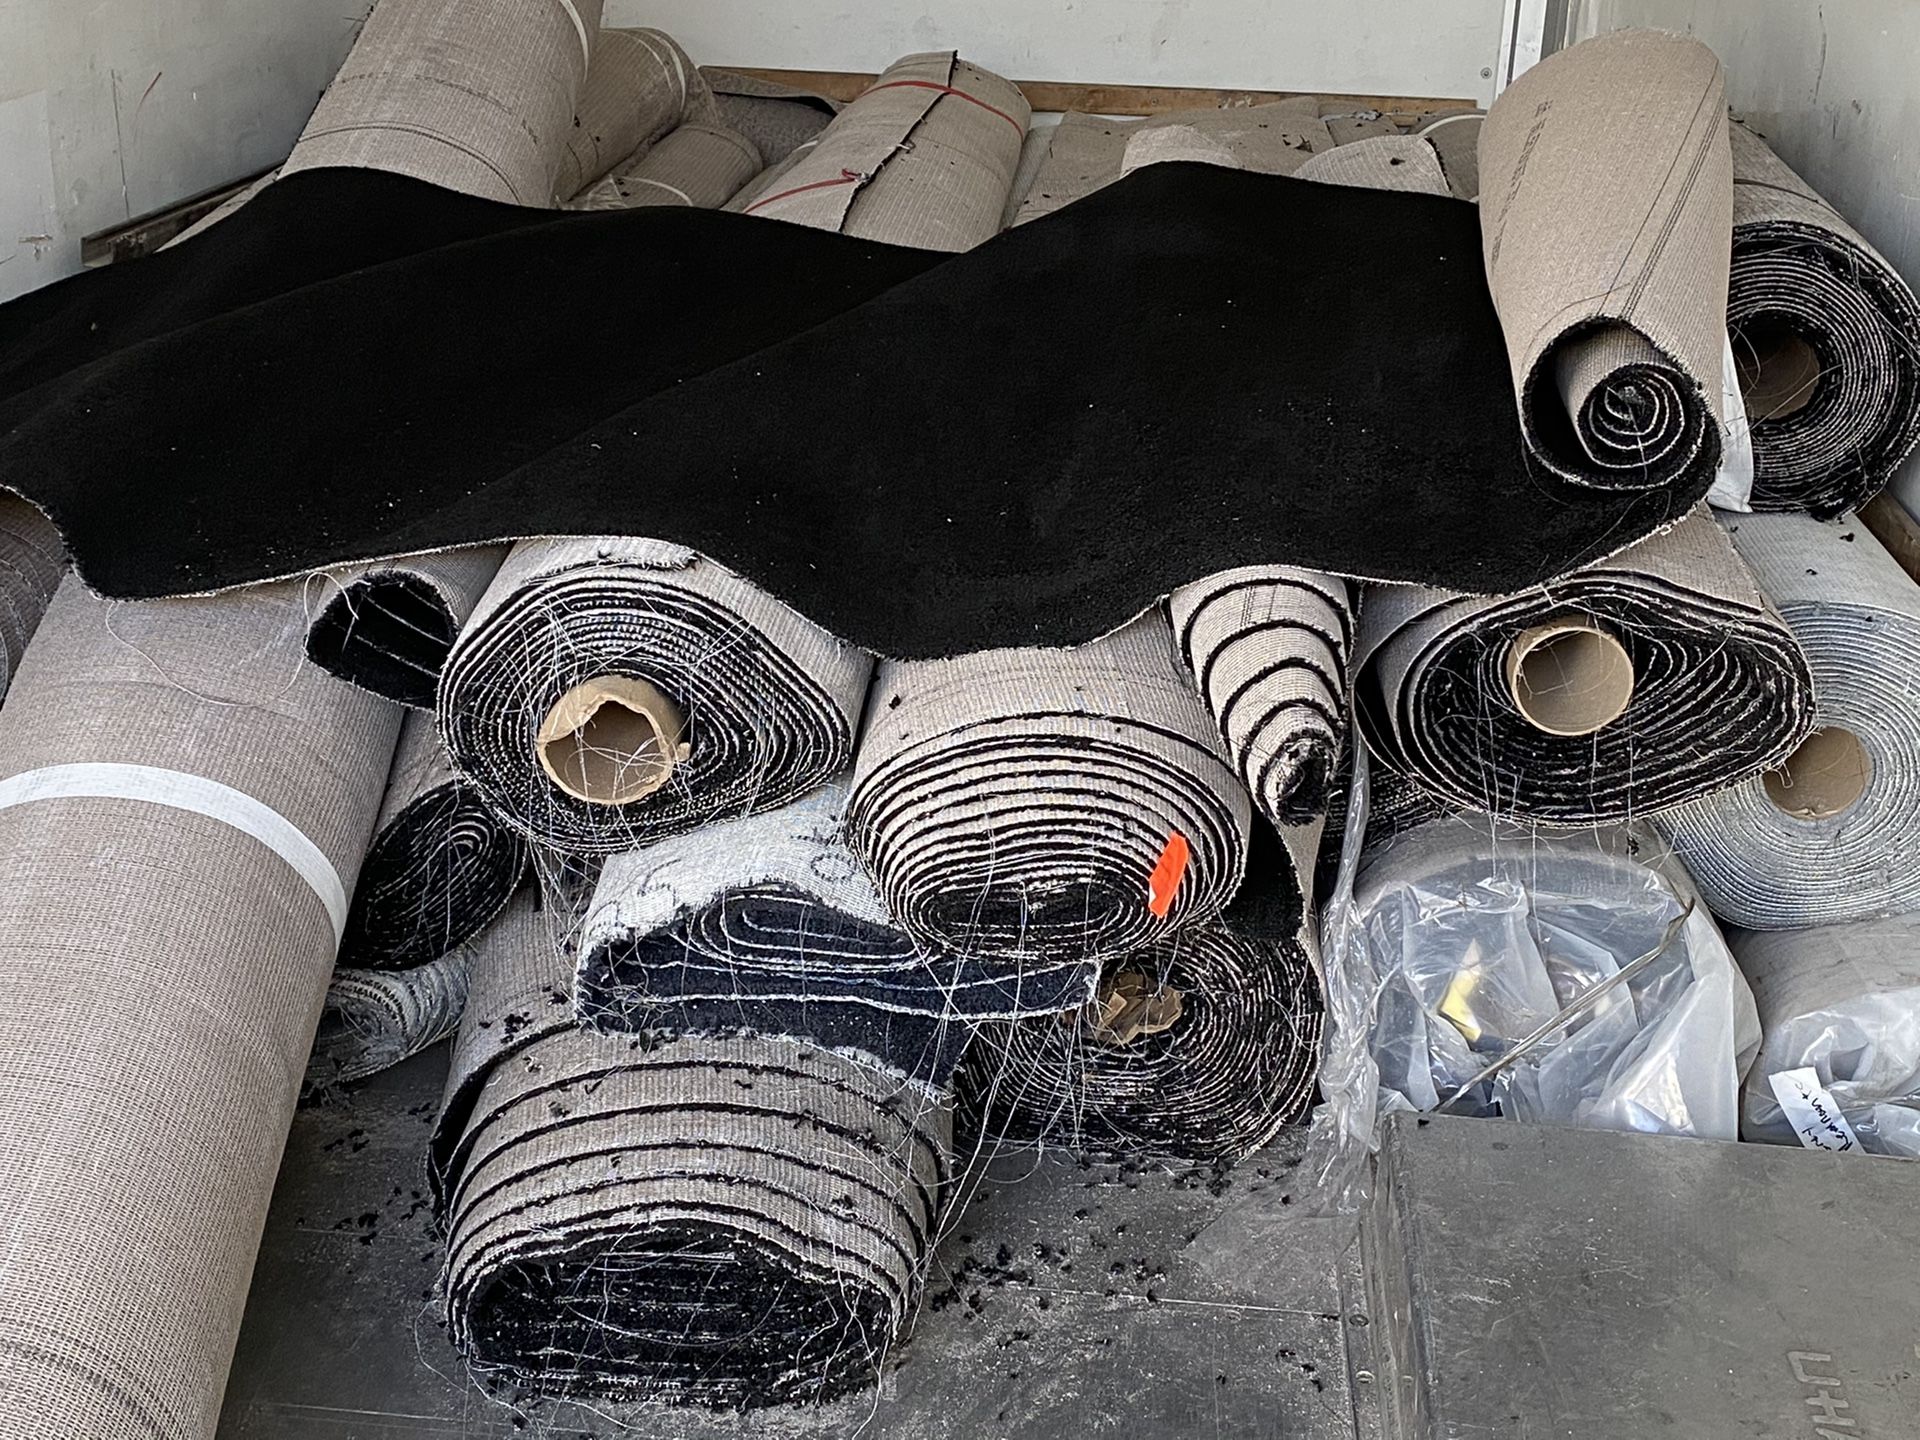 A variety of rolls of high quality carpet from $100 to $300 per roll